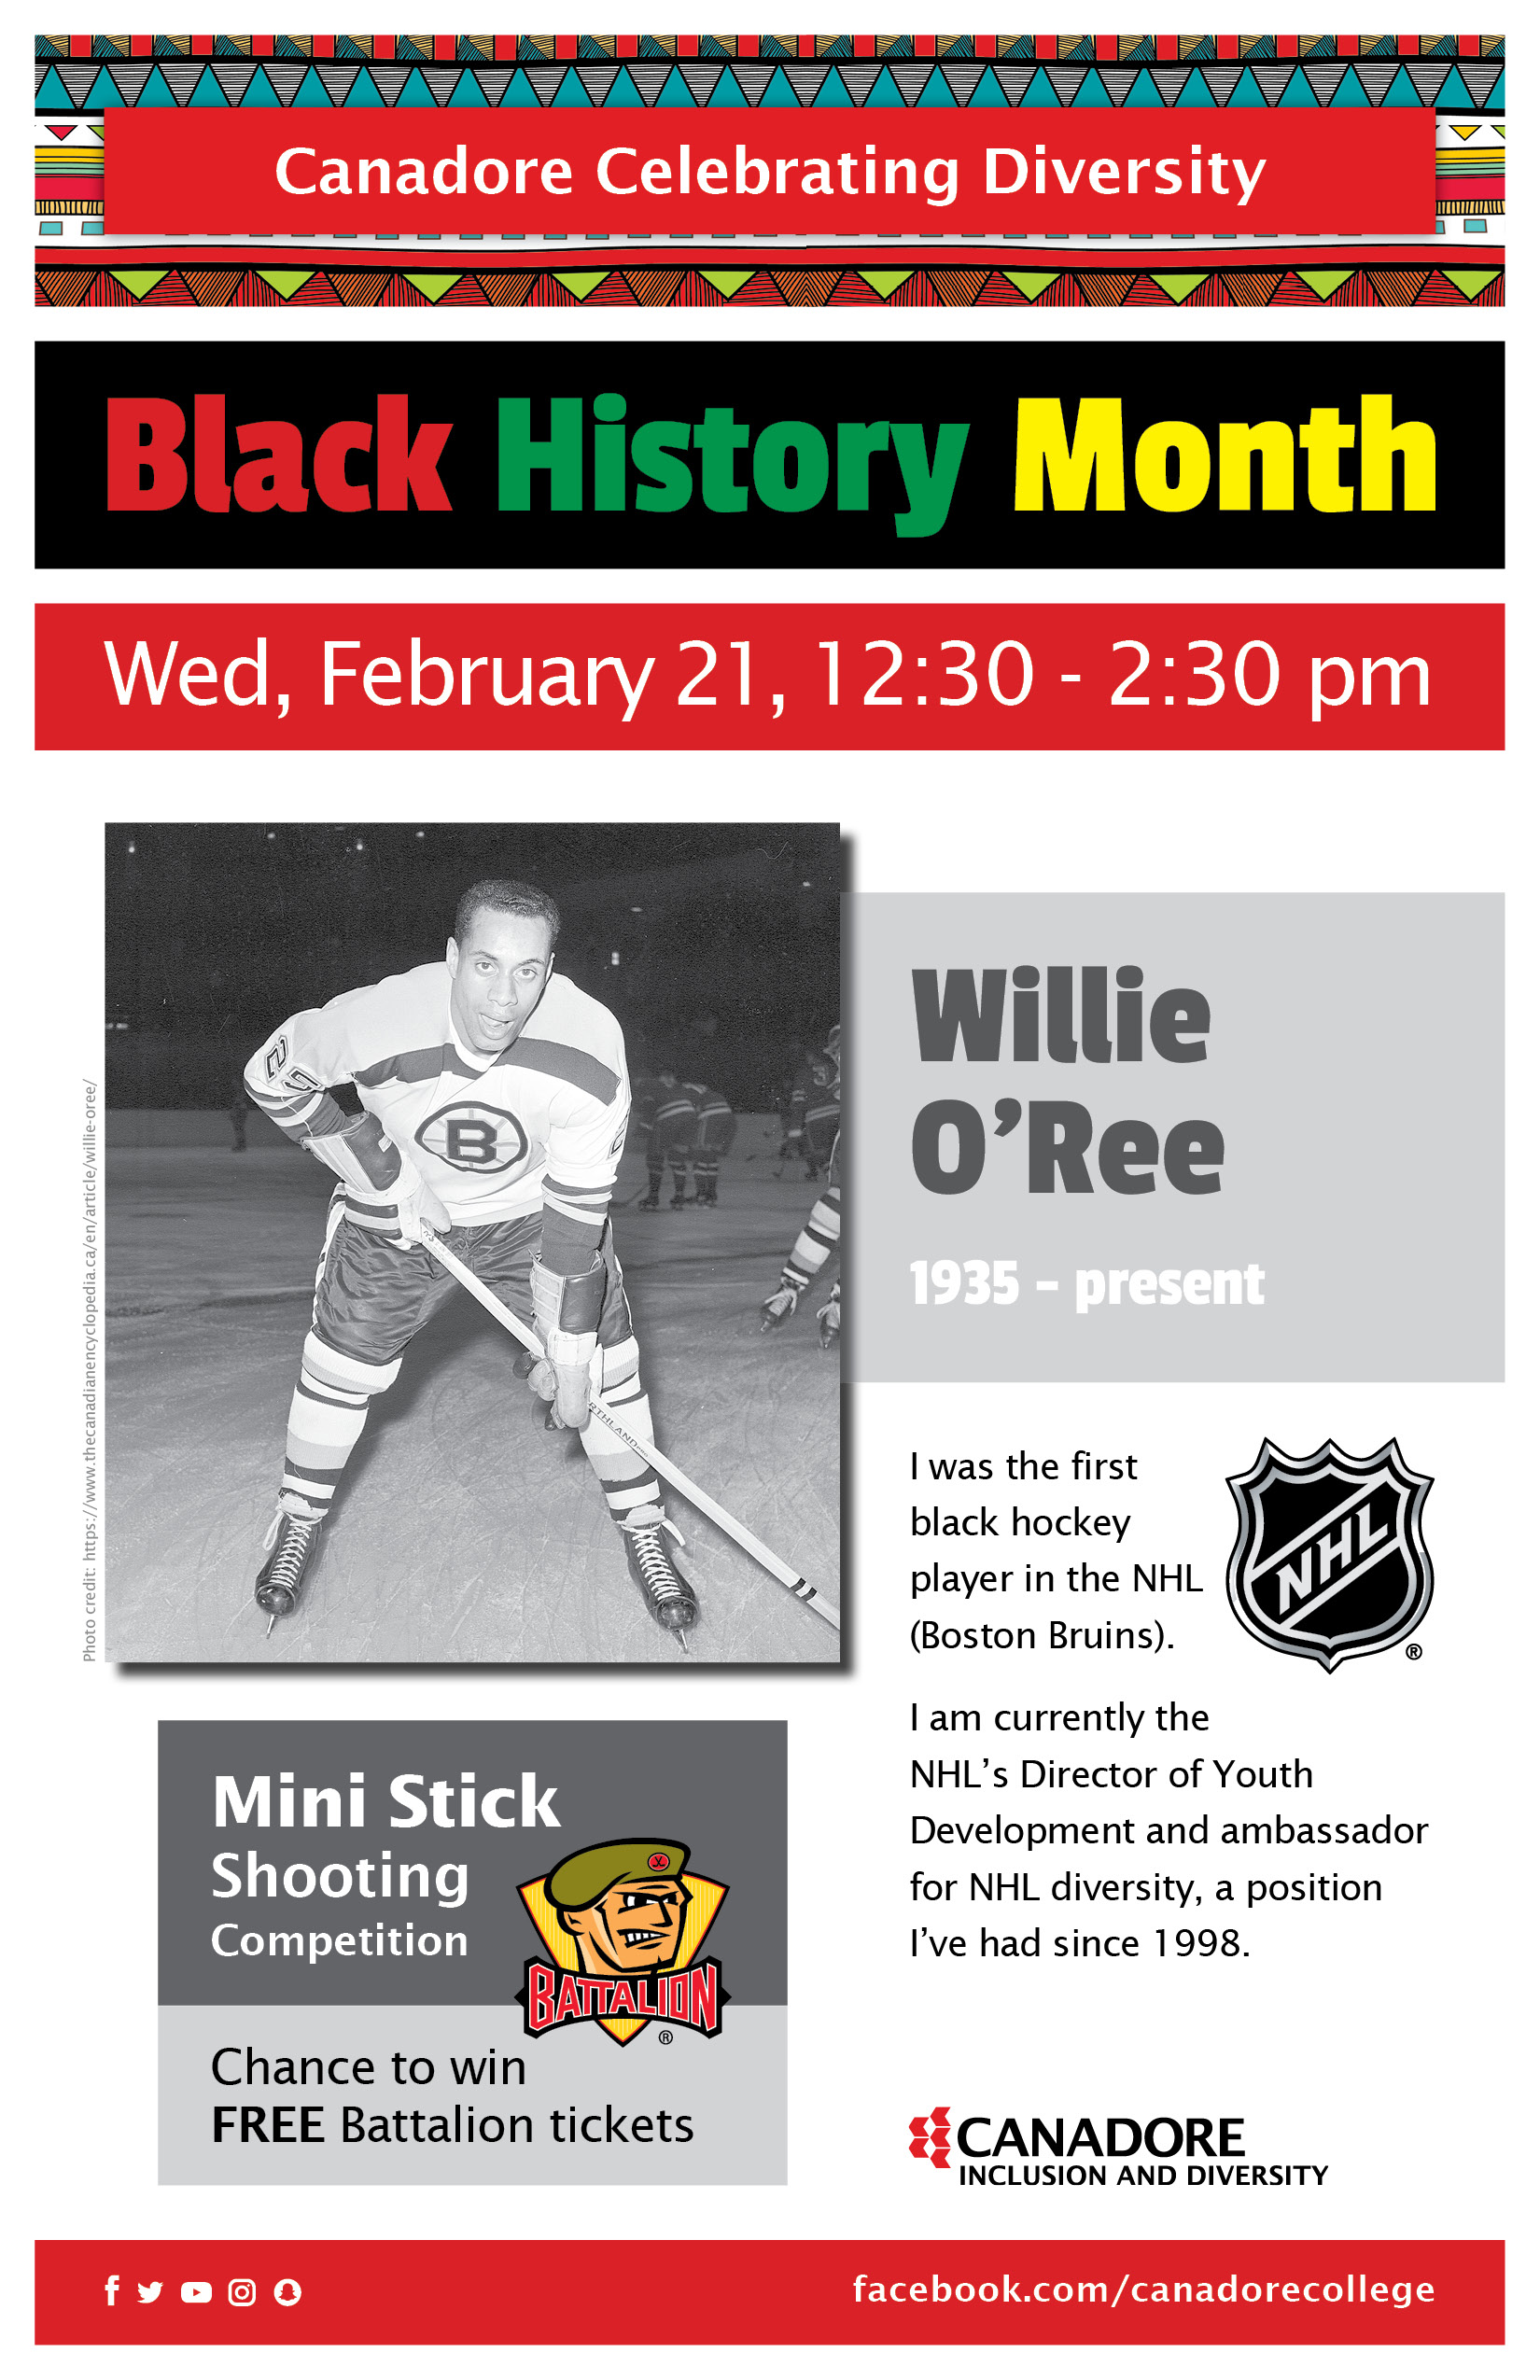 Willie O'Ree (born October 15, 1935, in Fredericton), Black History Month